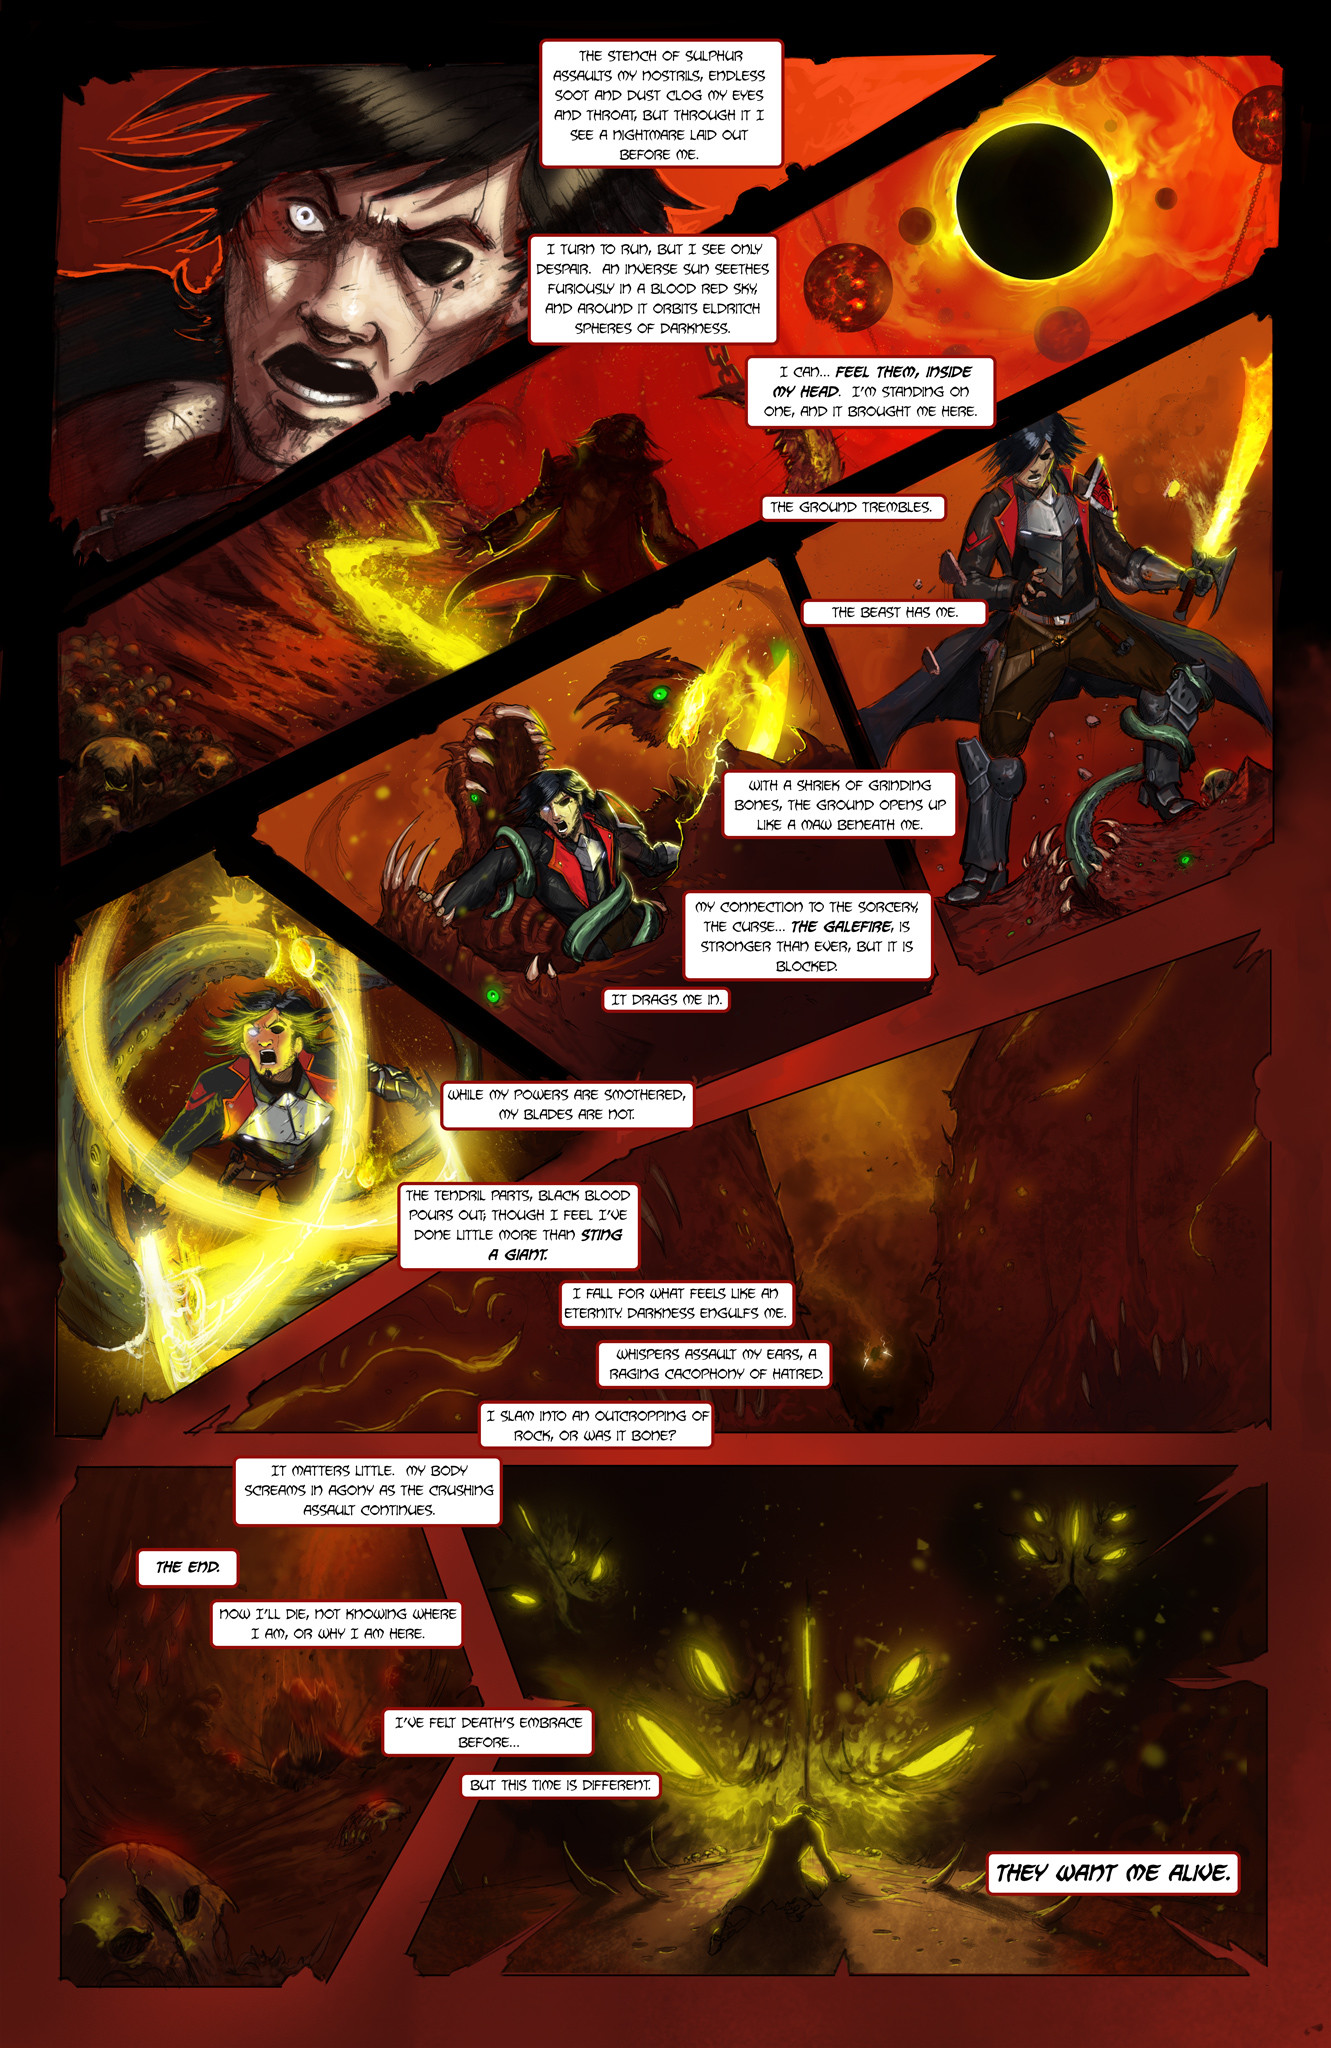 michael-rookard-chapter1-page4.jpg